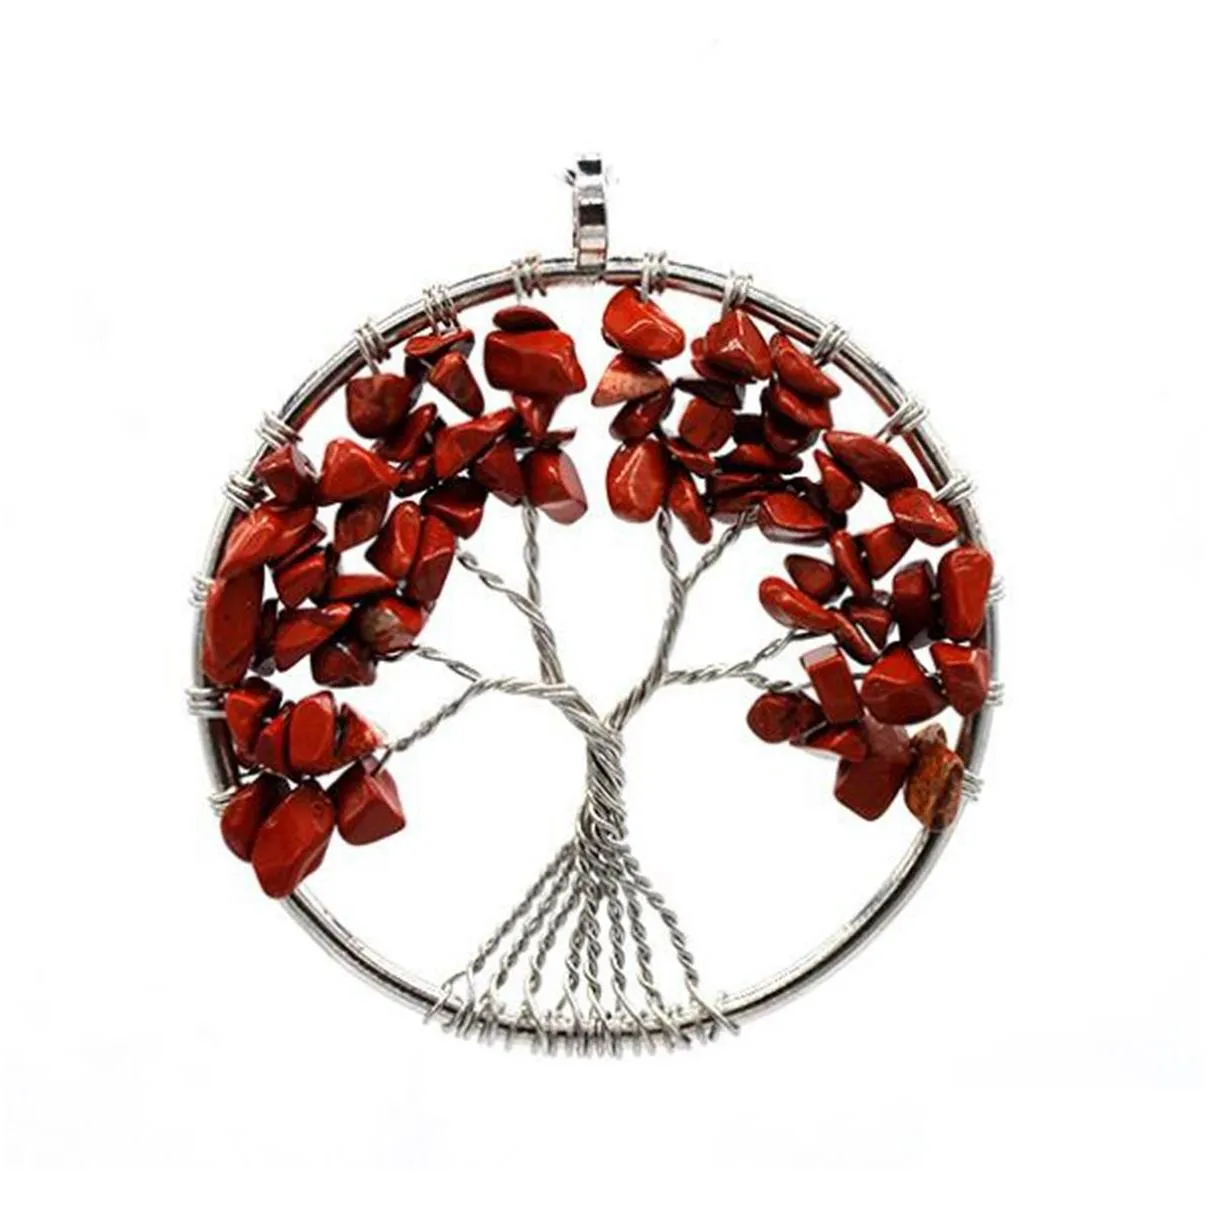 SEVENSTONE Tree of Life Pendant Natural Stone Crystal Men and Women Cure Energy Necklace Gemstone Earrings Keychain Jewelry